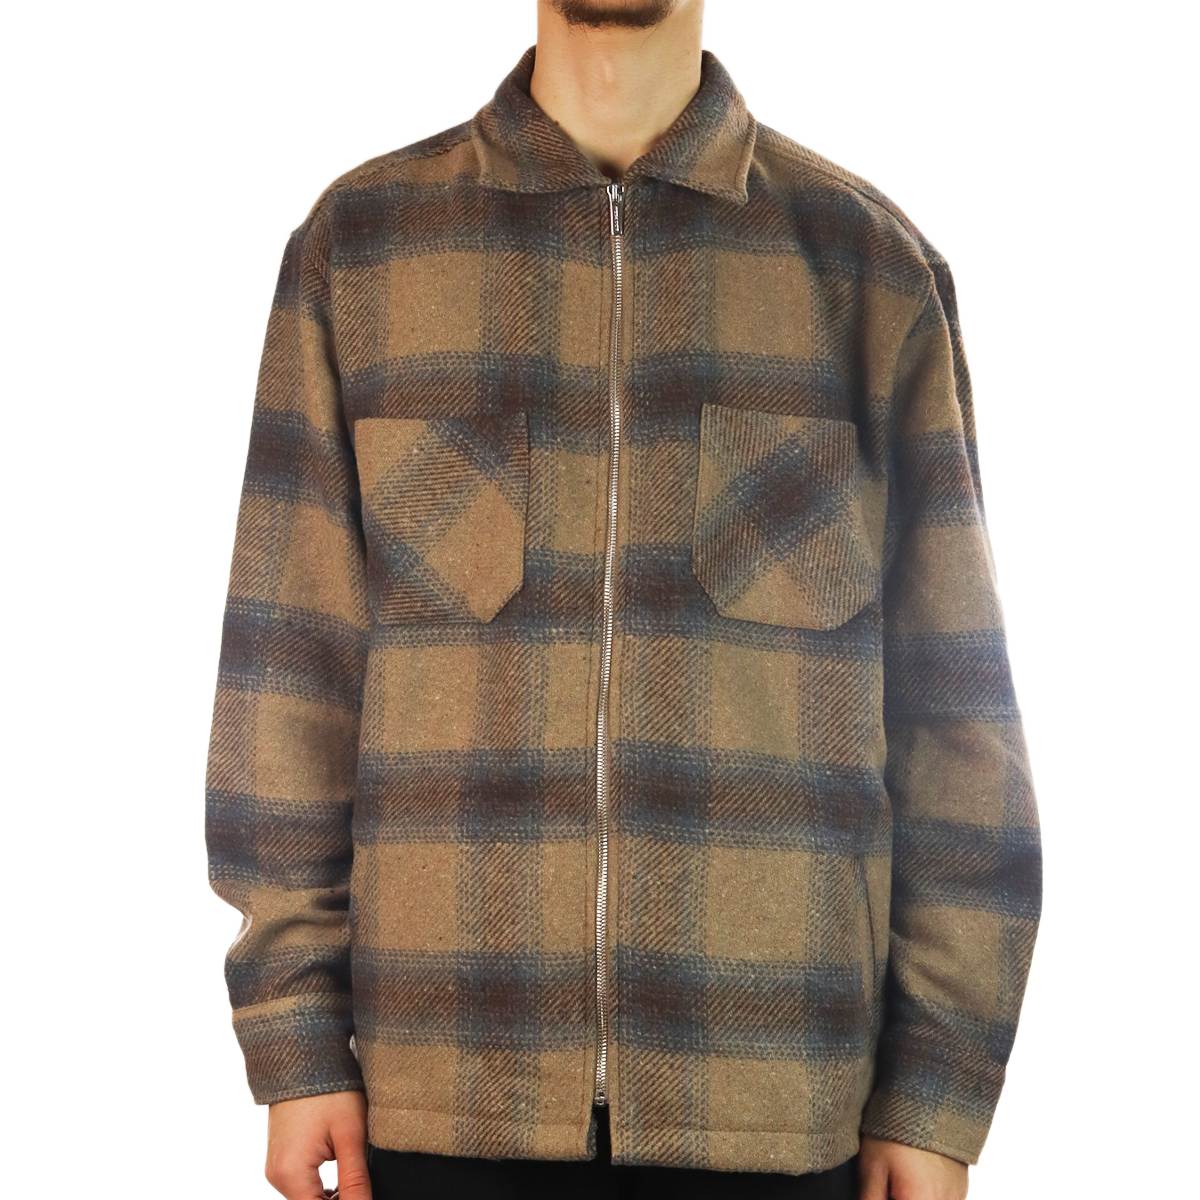 Pegador Bale Embroidery Heavy Flannel Zip Hemd 60237371-